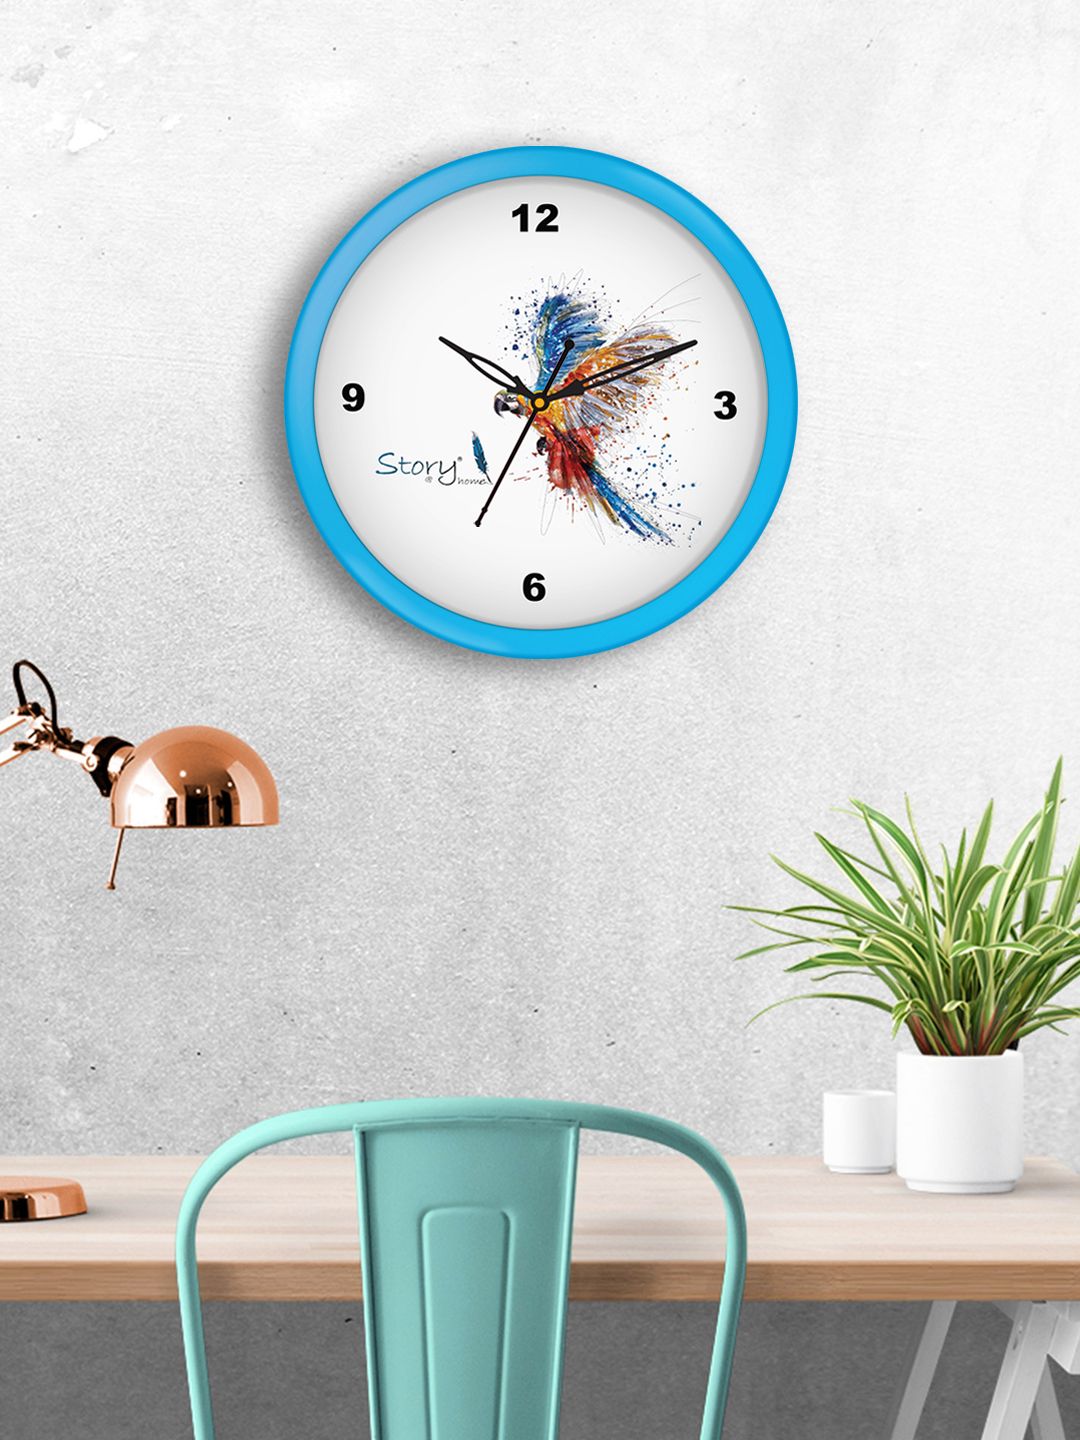 Story@home White Round Printed Analogue Wall Clock 25 cm x 25 cm Price in India